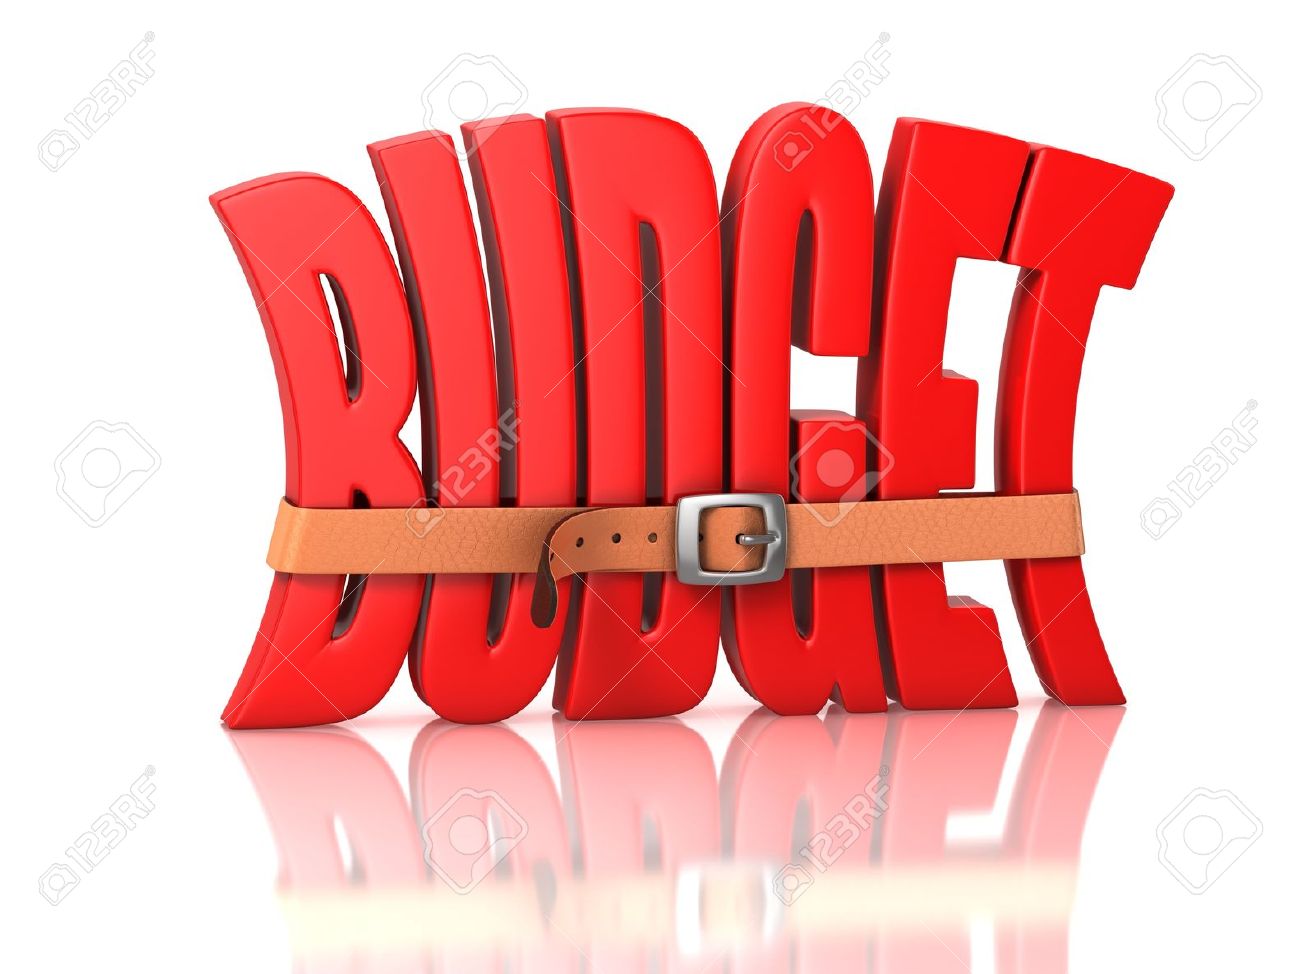 budget clipart national